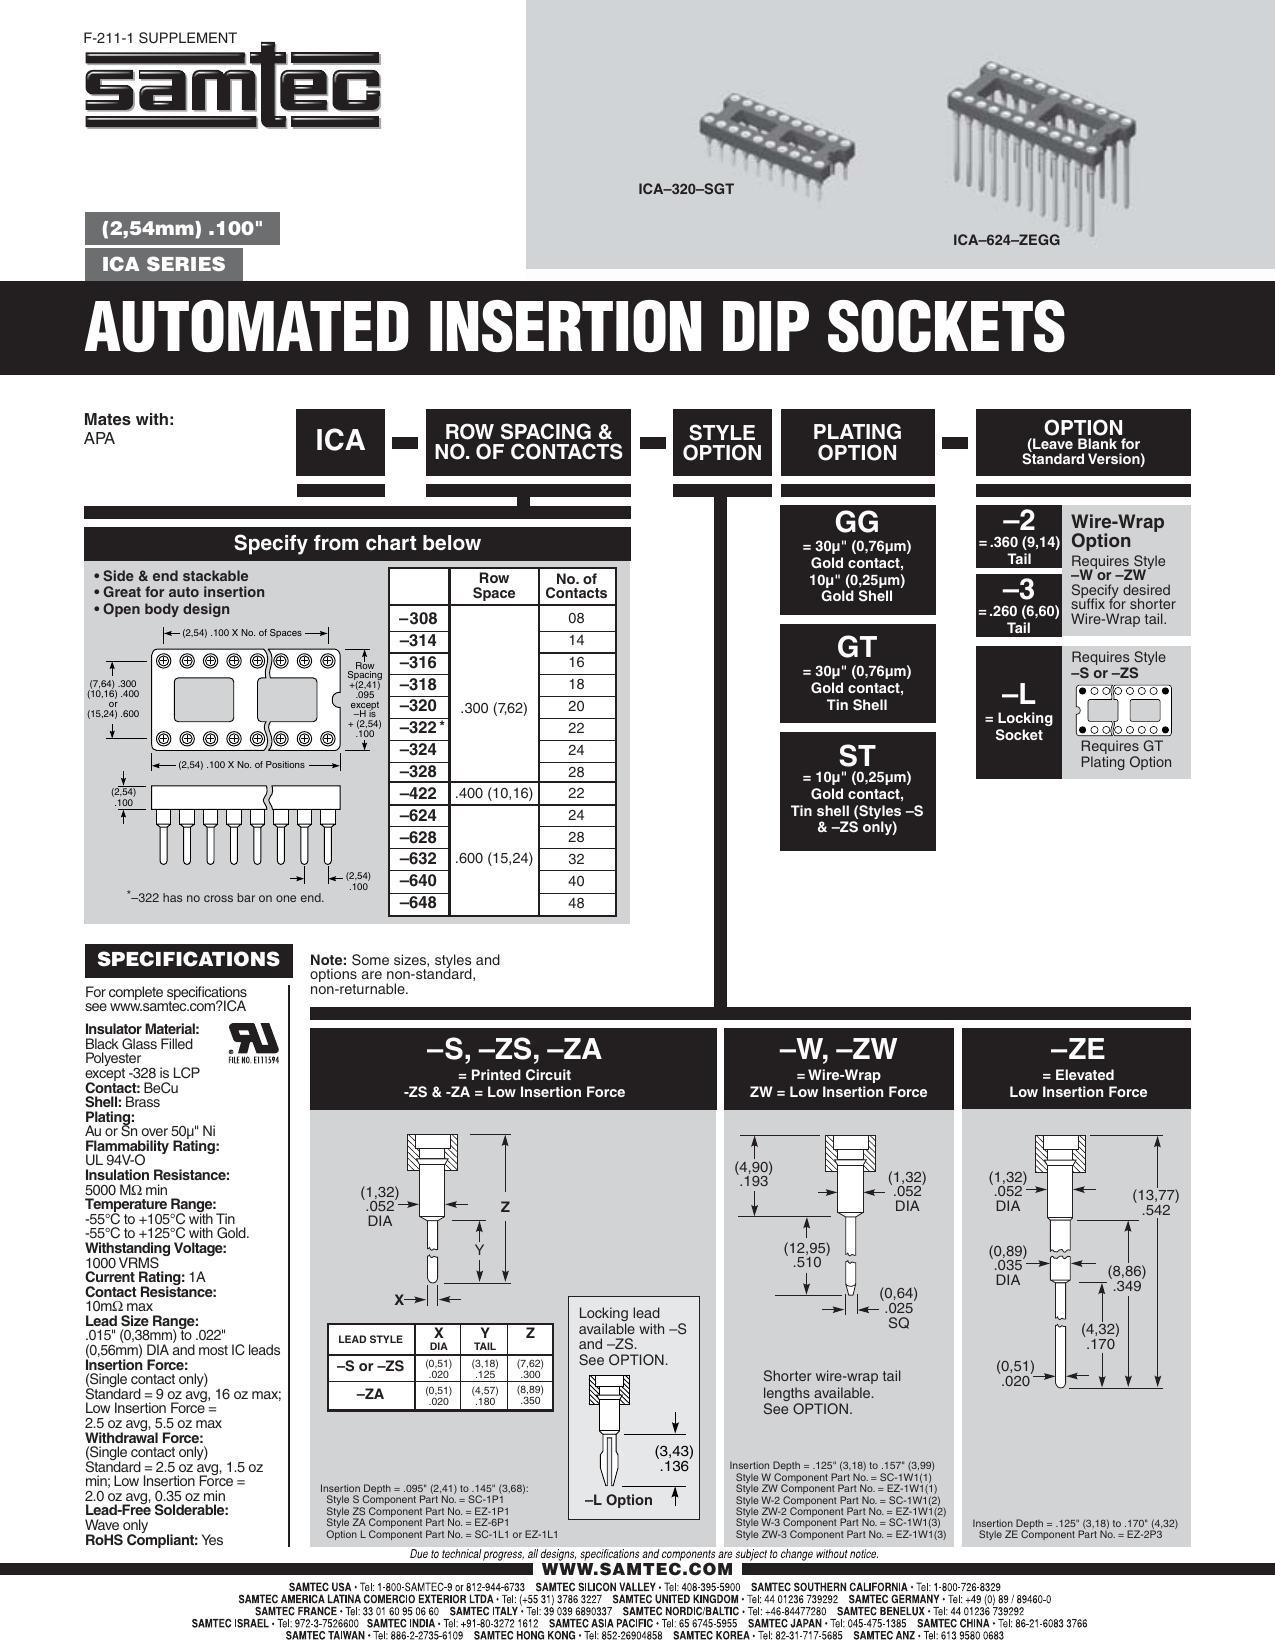 ica-320-sgt-254mm-100-ica-series-automated-insertion-dip-sockets.pdf